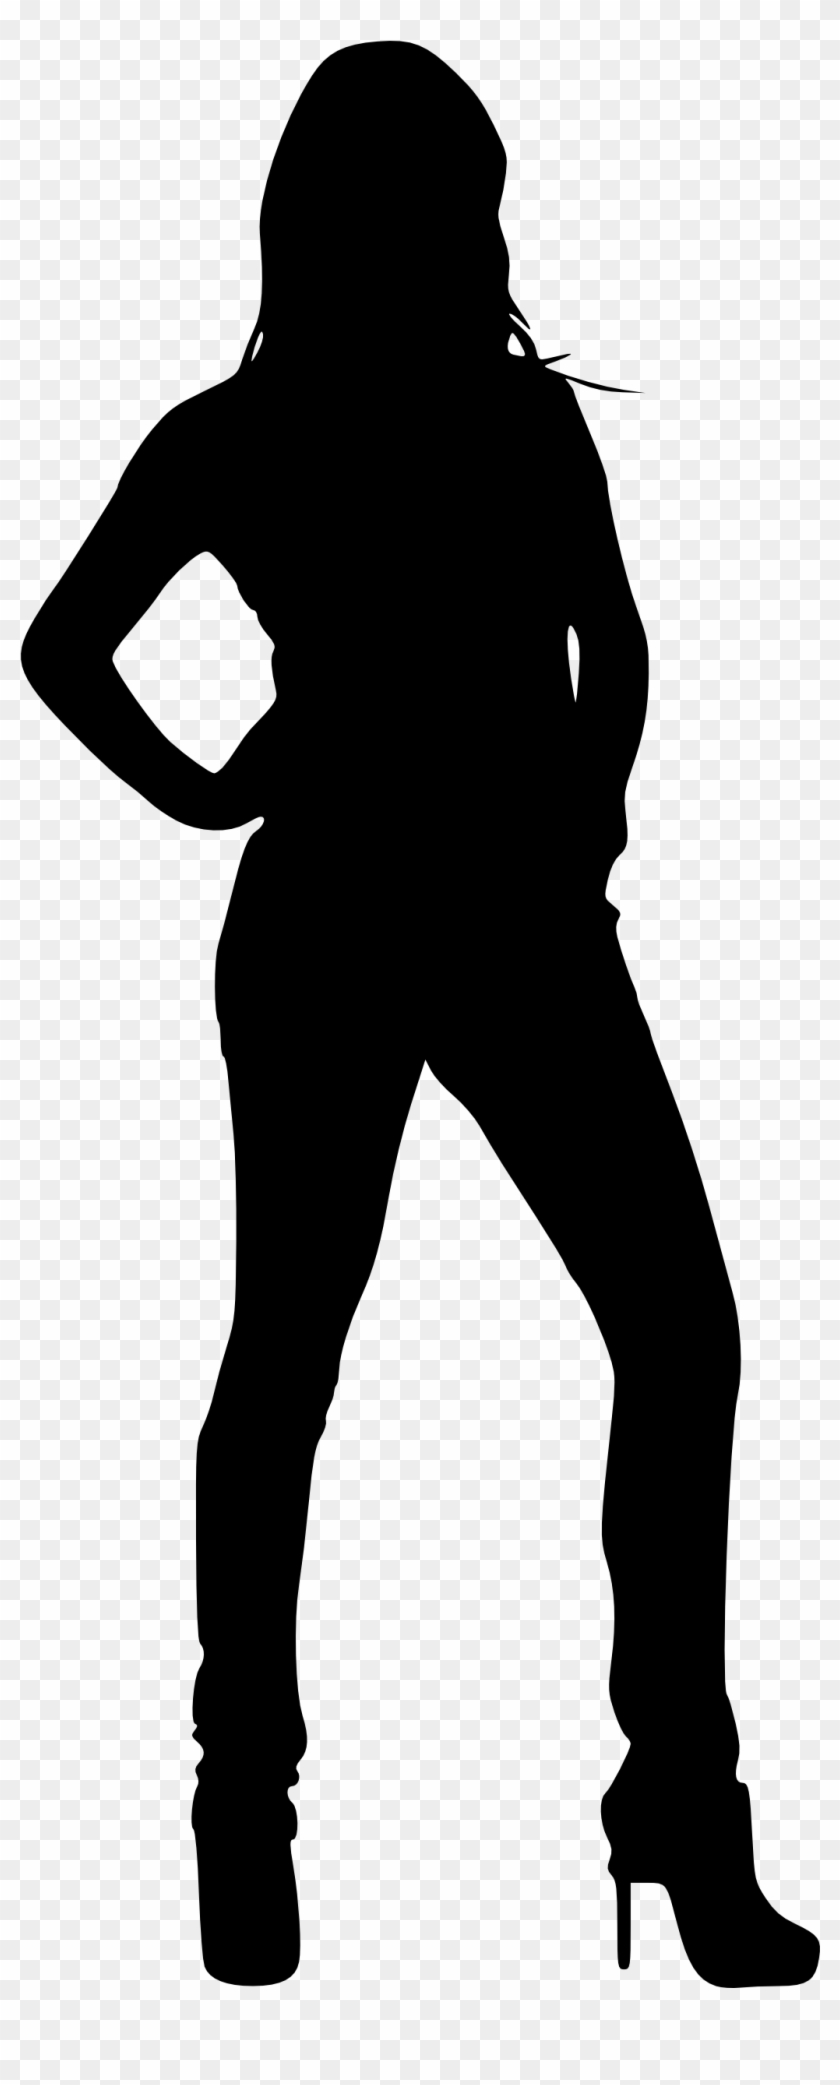 30 Woman Silhouettes - Woman Silhouette Png #41688